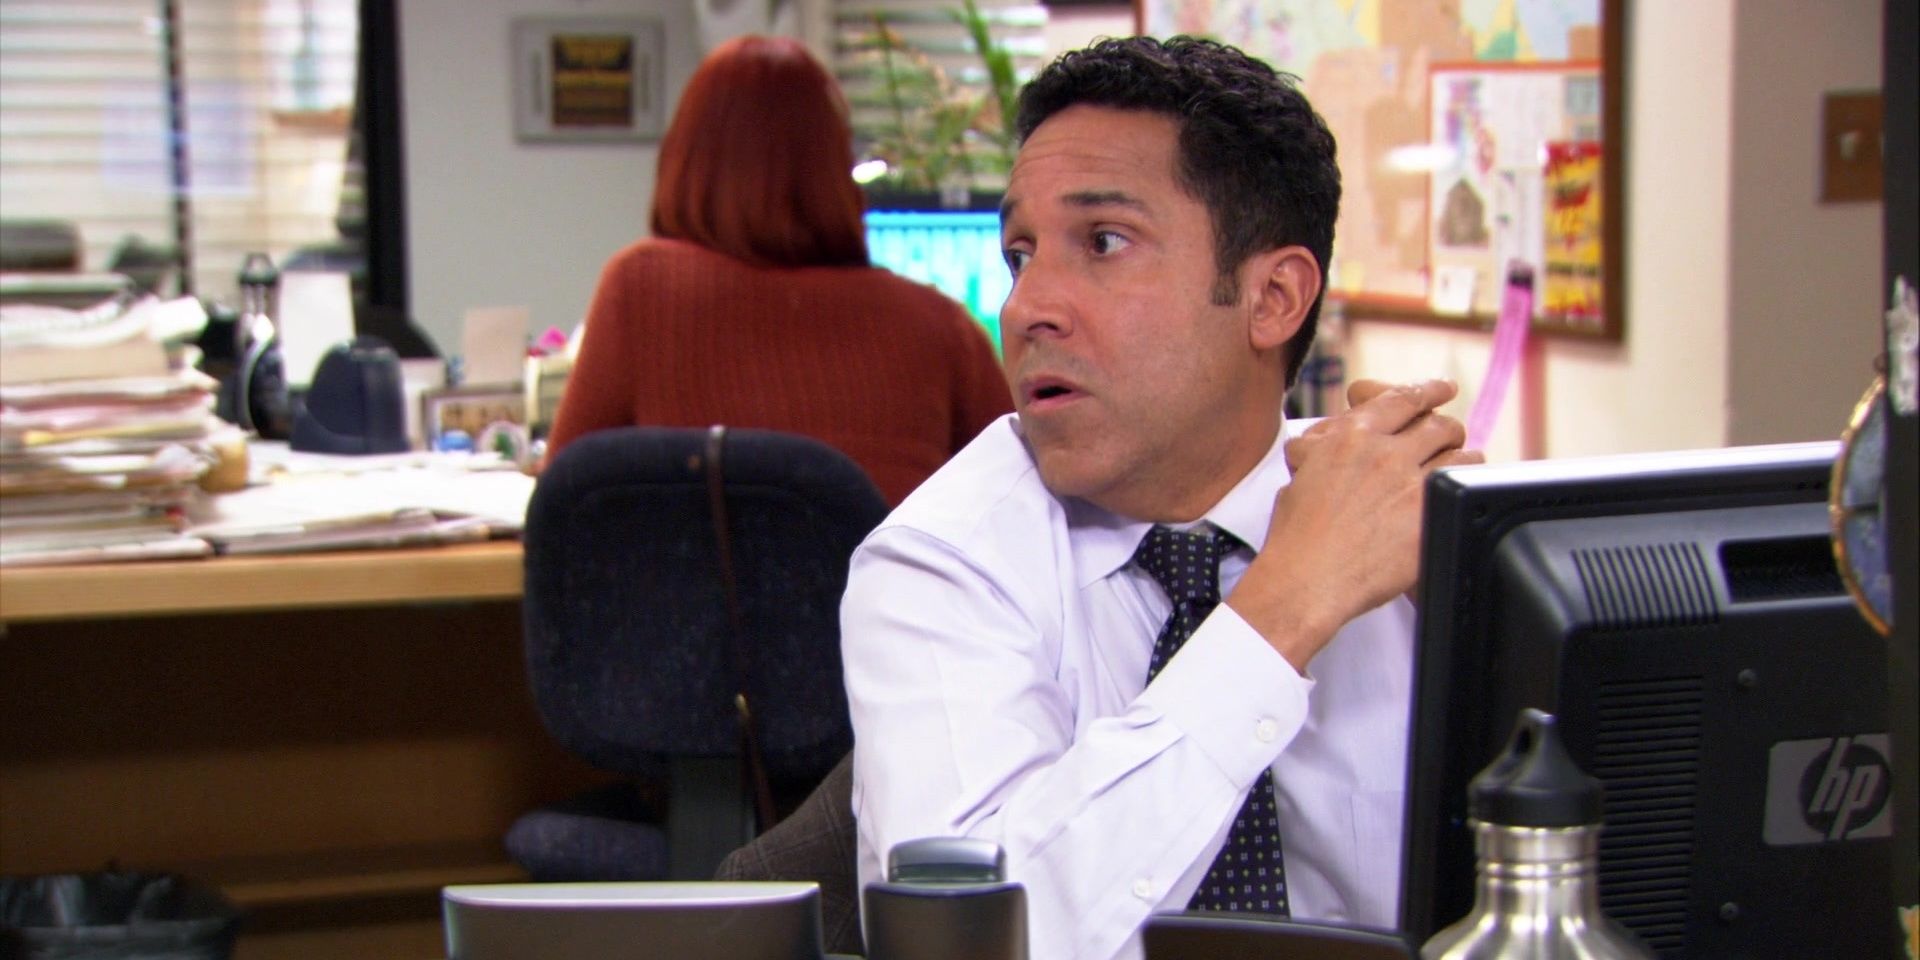 Oscar and Meredith at their desks on The Office